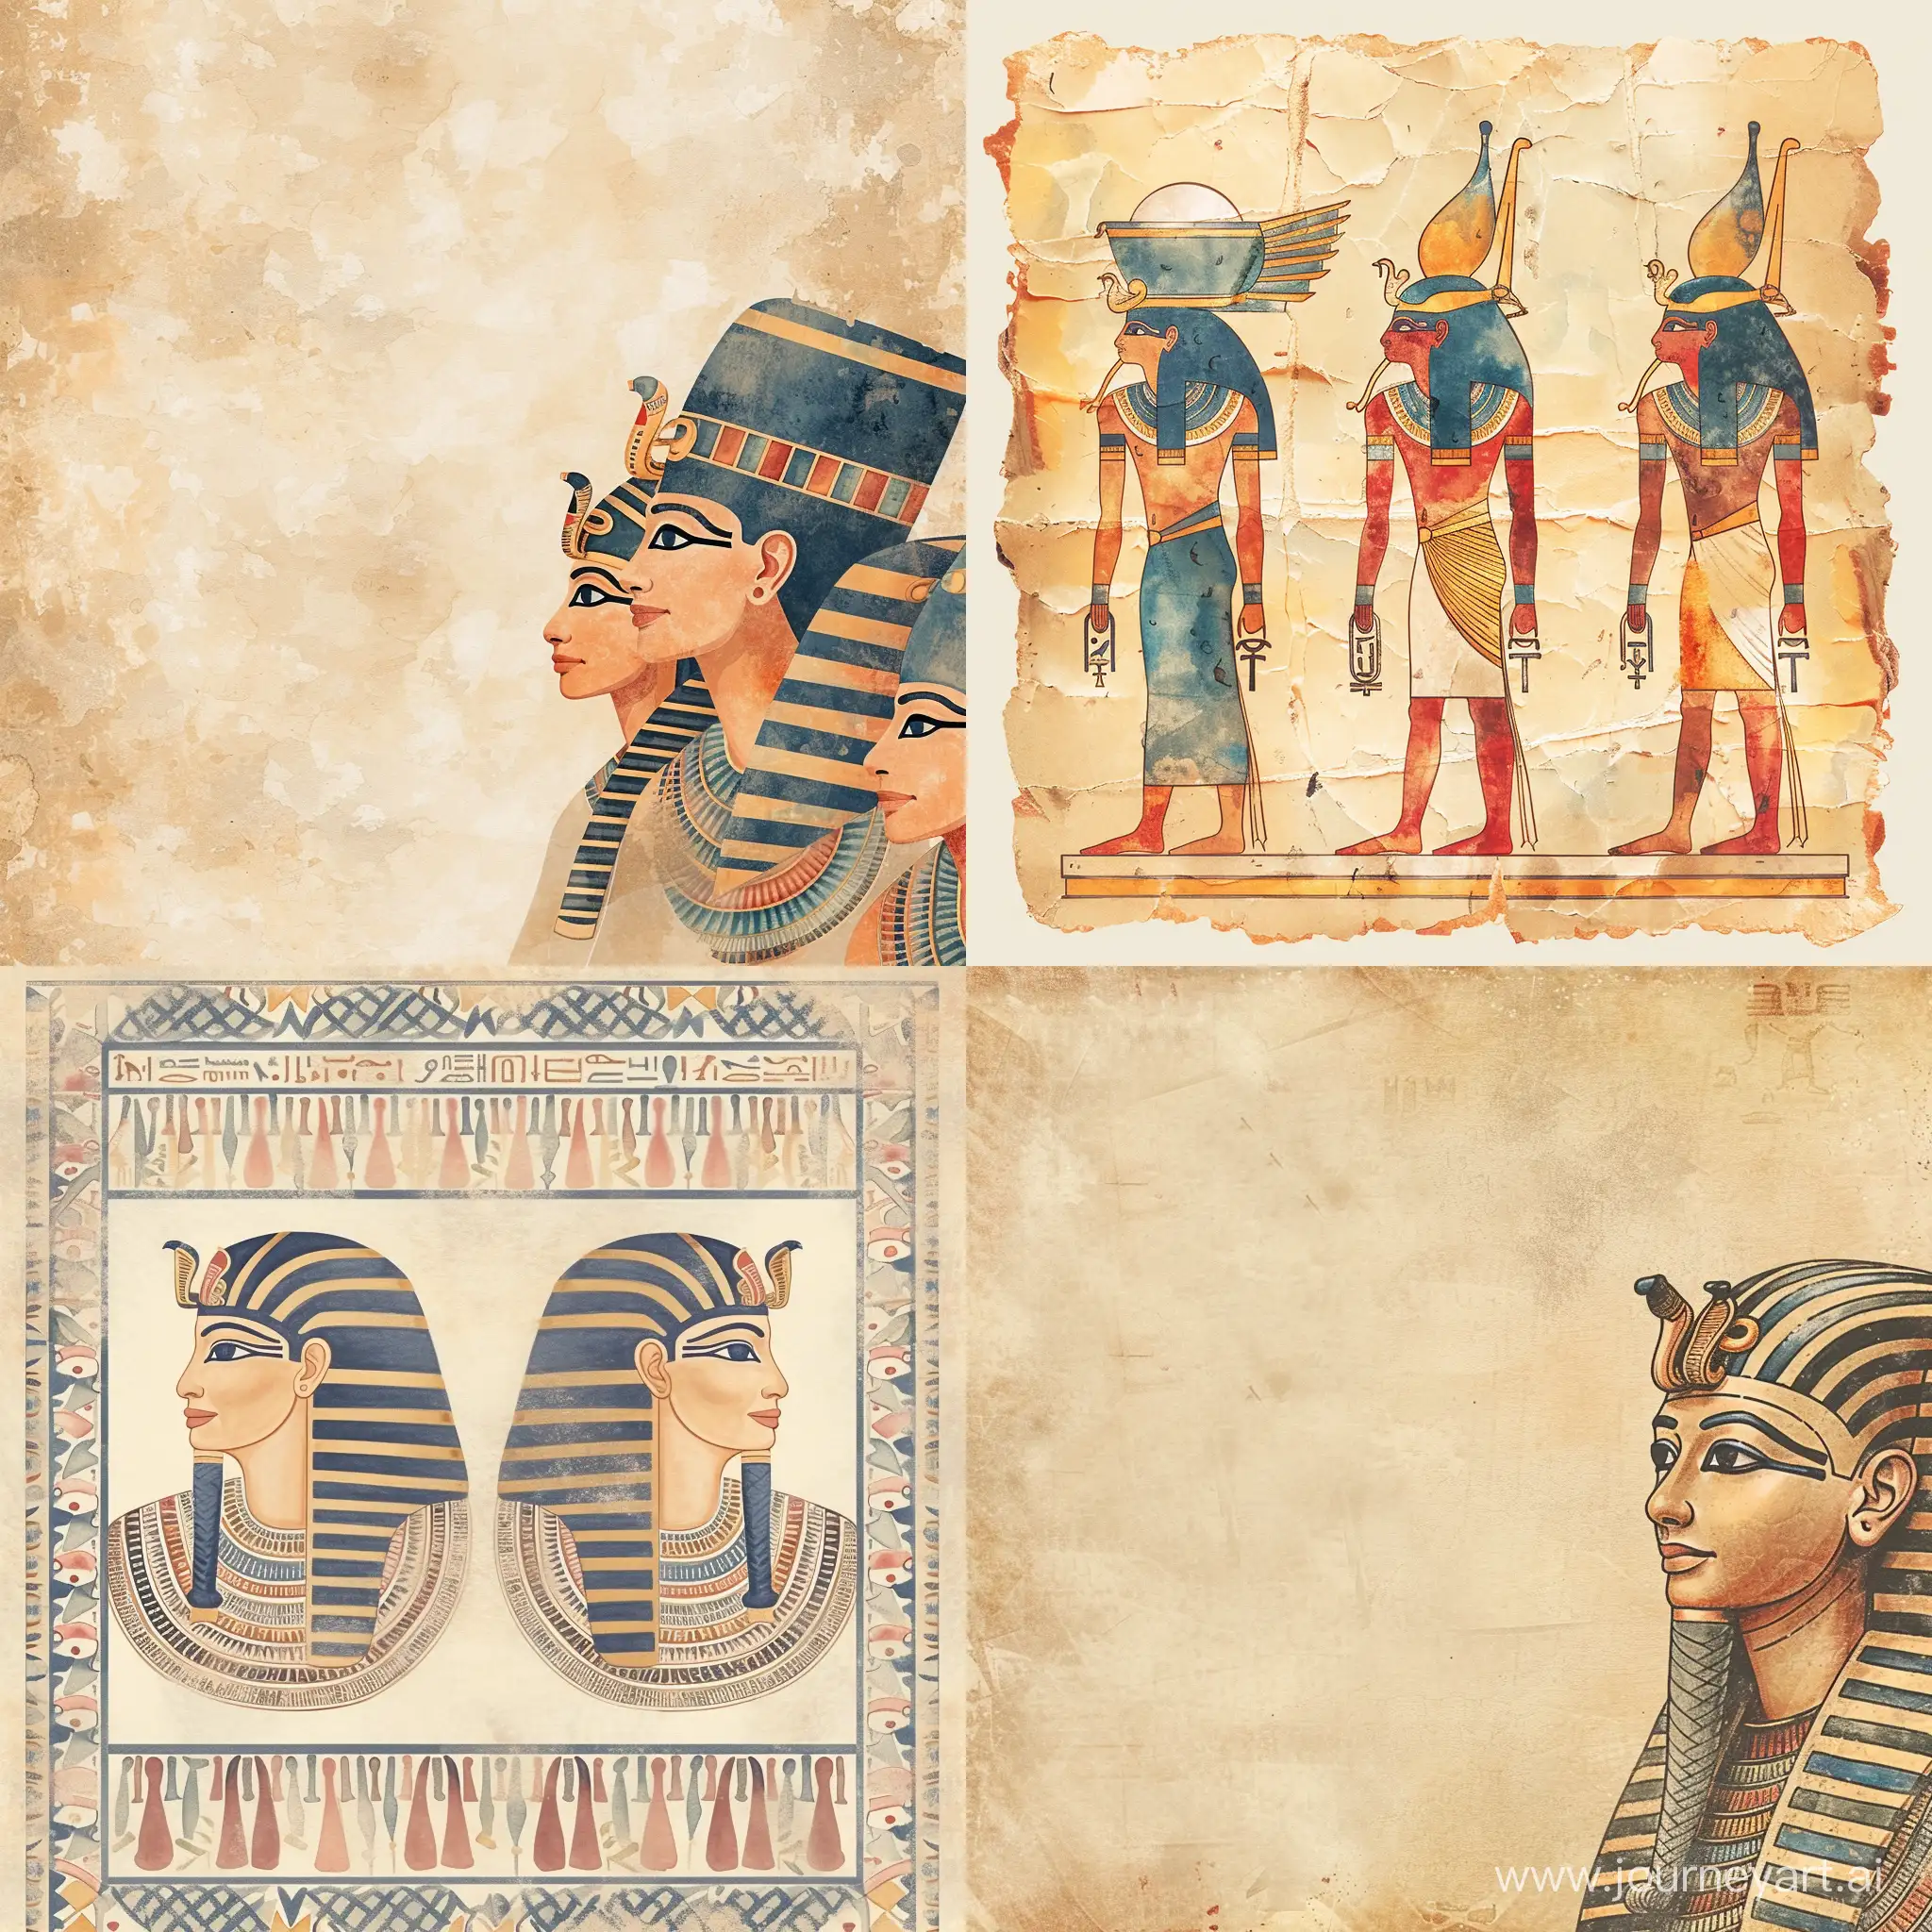 Delicate-Watercolor-Stylized-Caricature-with-Ancient-Egyptian-Motifs-on-Antique-Paper-Background